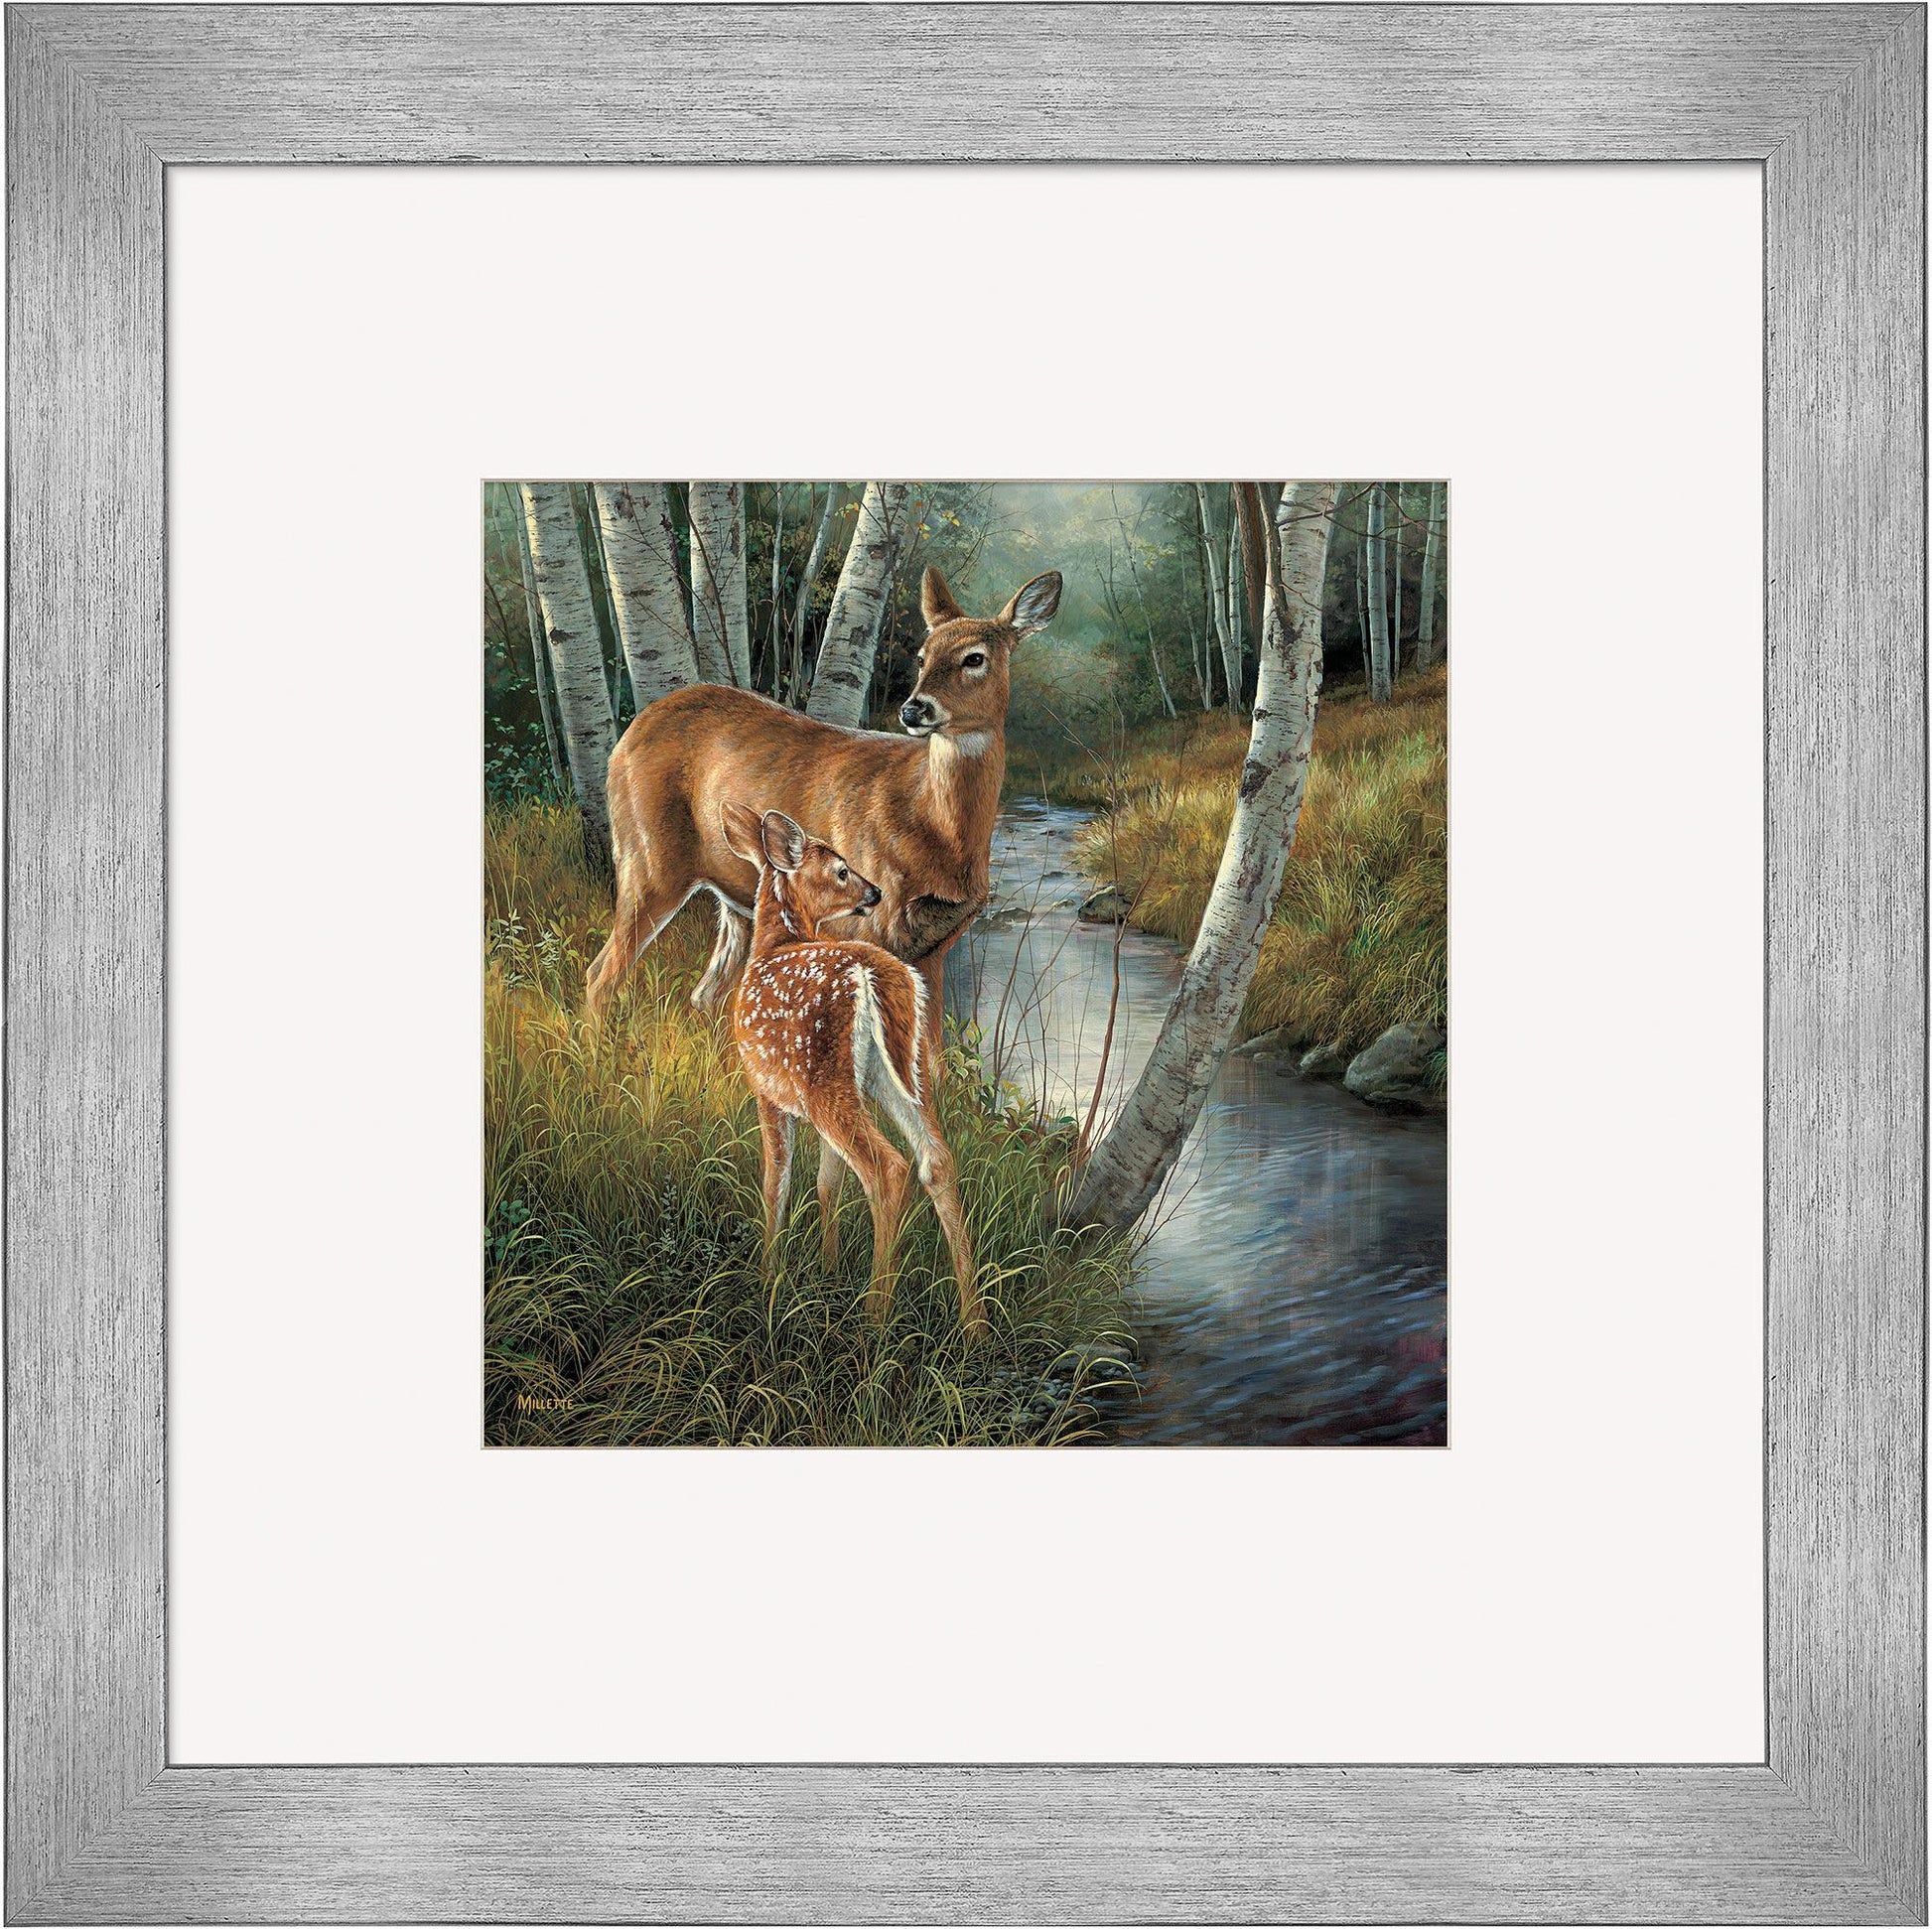 Birch Creek—Whitetail Deer Contempo Square - Wild Wings